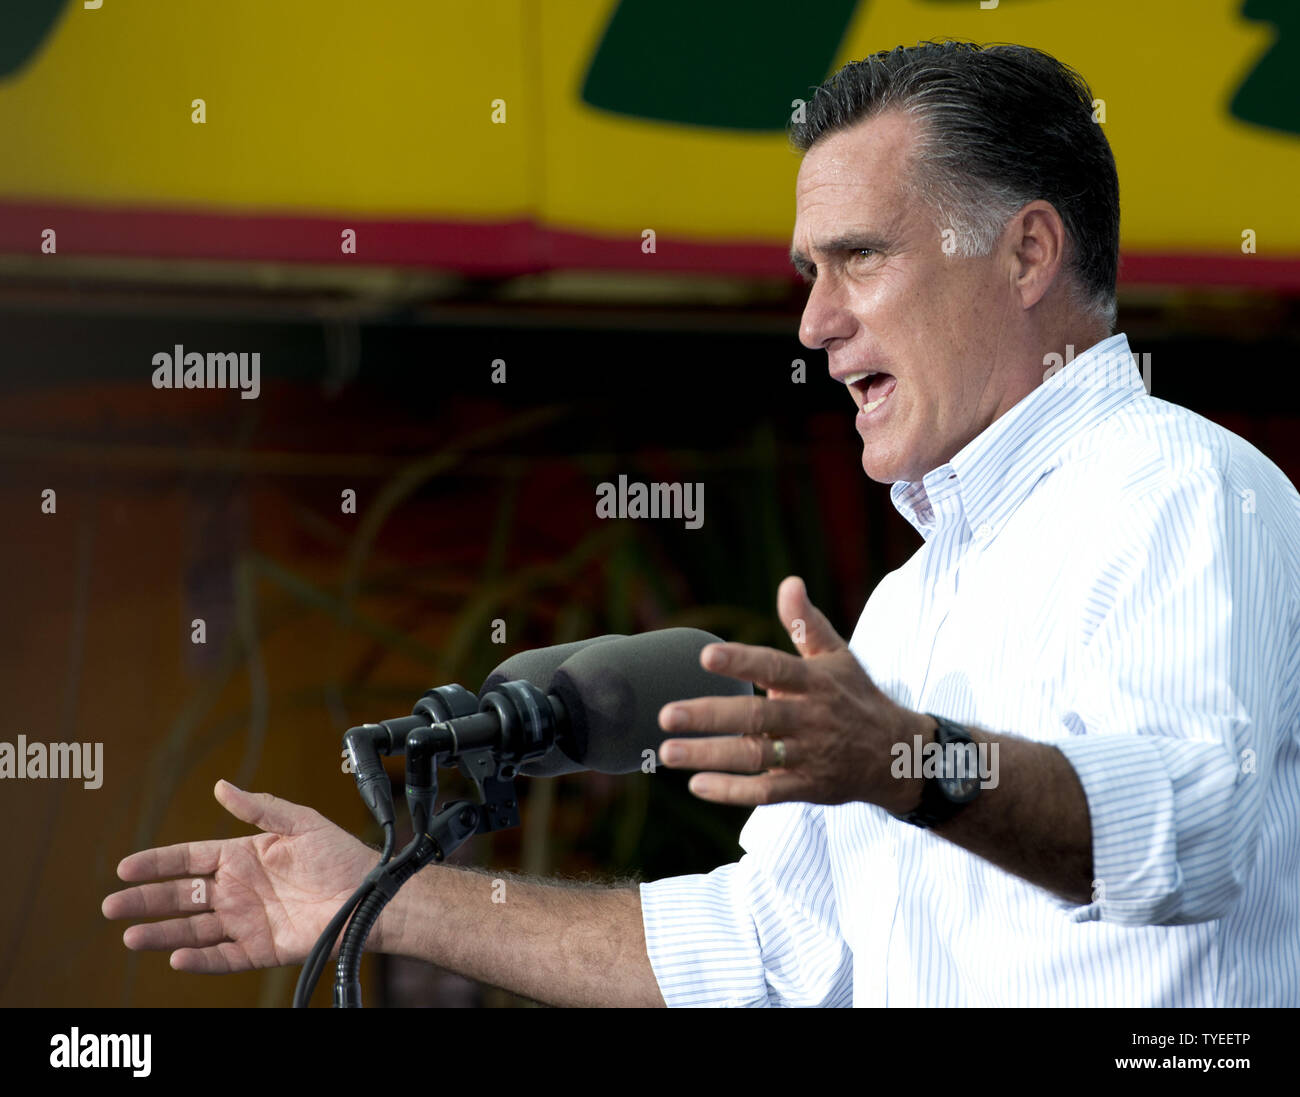 Presumptive Republican presidential nominee Mitt Romney delivers remarks to supporters  during the "Romney Plan for a Stronger Middle Class" bus tour, at El Palacio De Los Jugos,  Miami, Florida on August 13, 2012. Romney's bus tour is traveling through four battleground  states ( Virginia, North Carolina, Florida, & Ohio), holding fundraisers in advance of the November 4 general election.  UPI/Gary I Rothstein Stock Photo